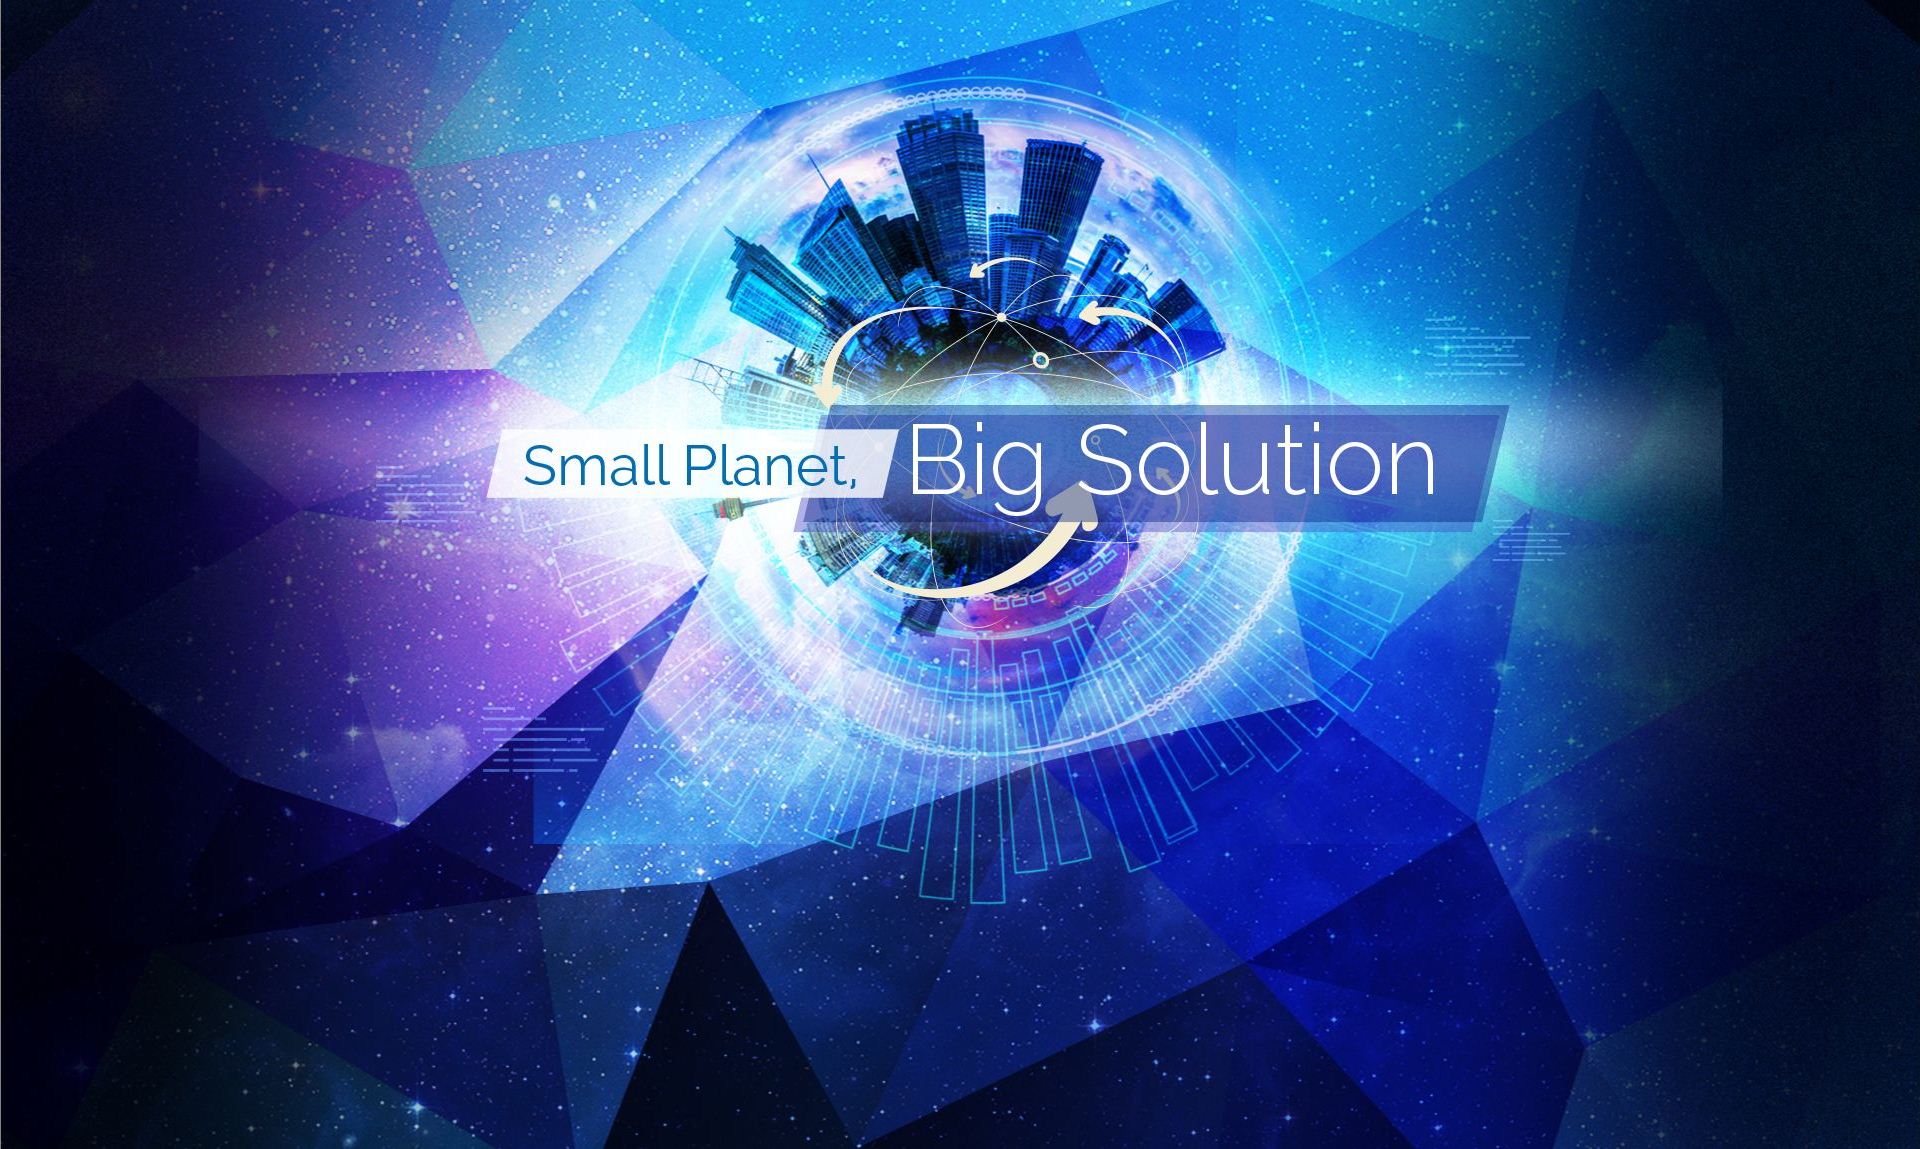 Small Planet, Big Solution